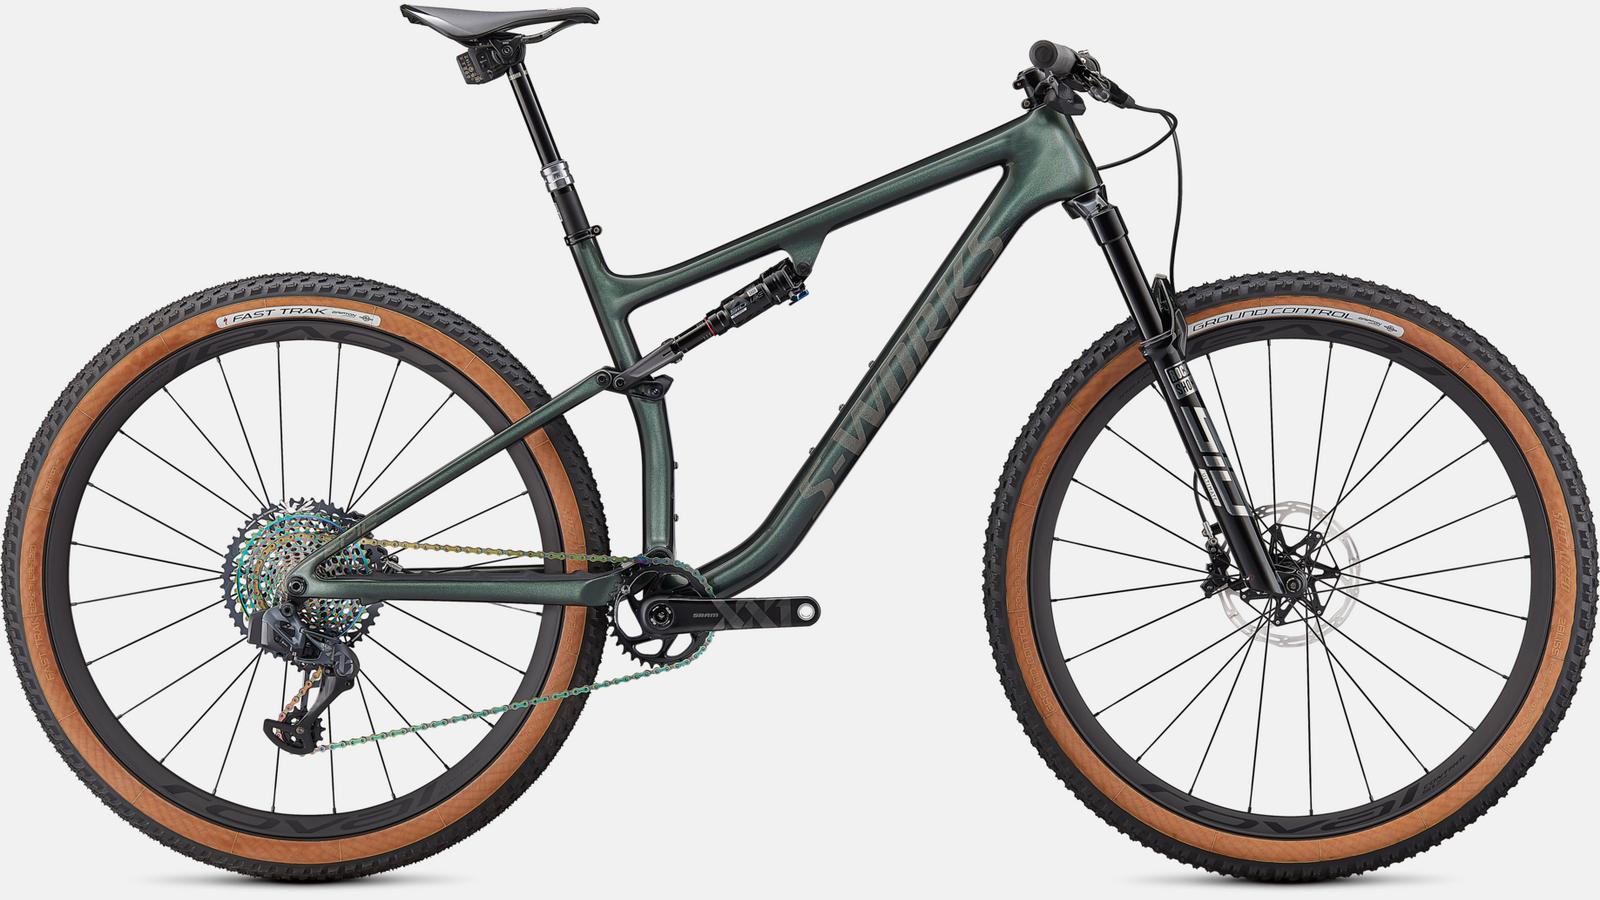 Paint for 2021 Specialized S-Works Epic EVO - Gloss Oak Green Metallic